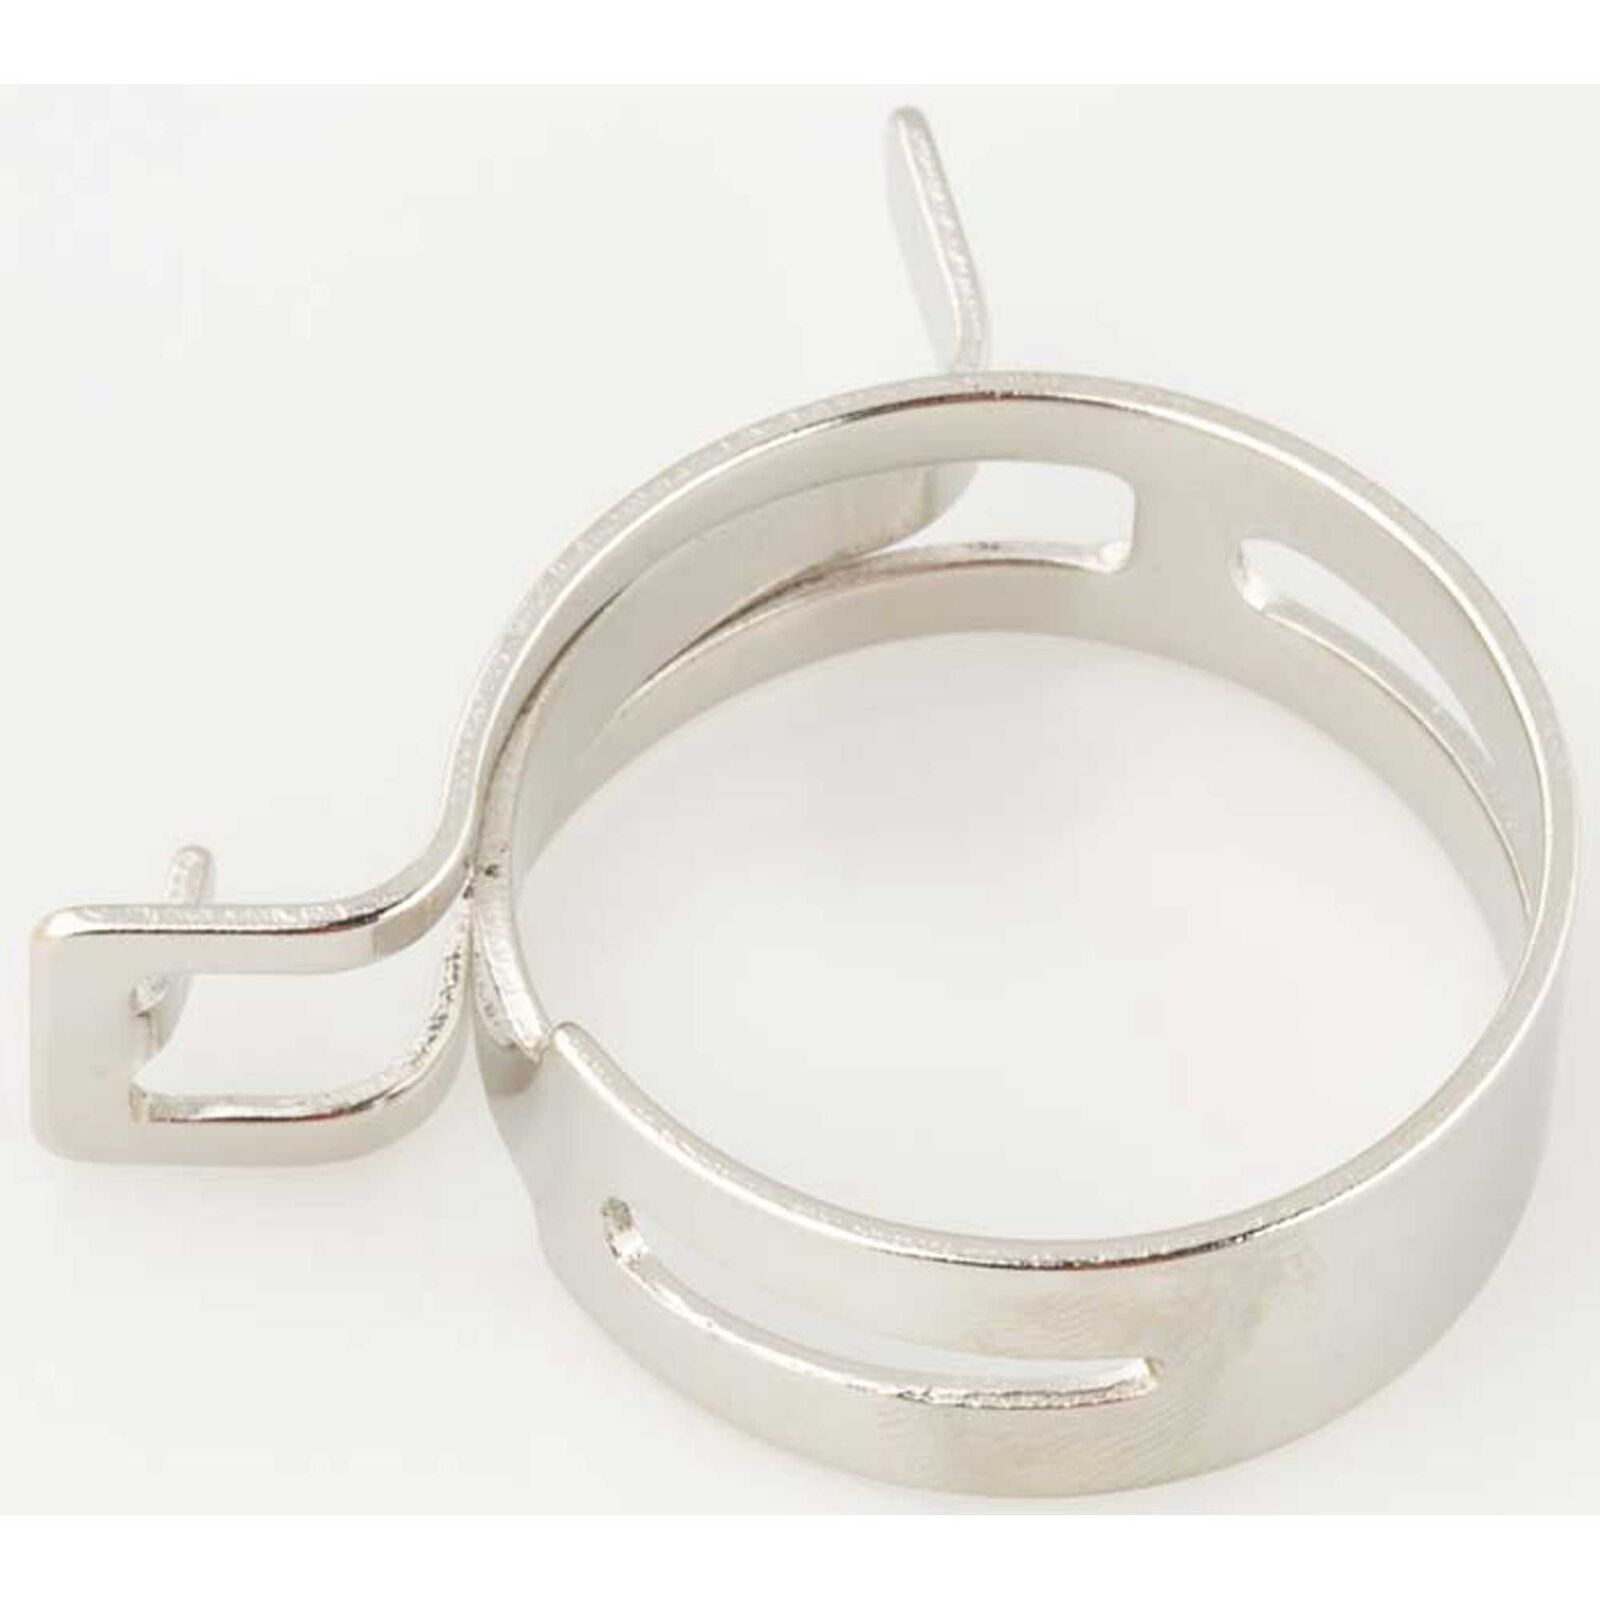 Exhaust Extension Tube Clamp: DLE-222